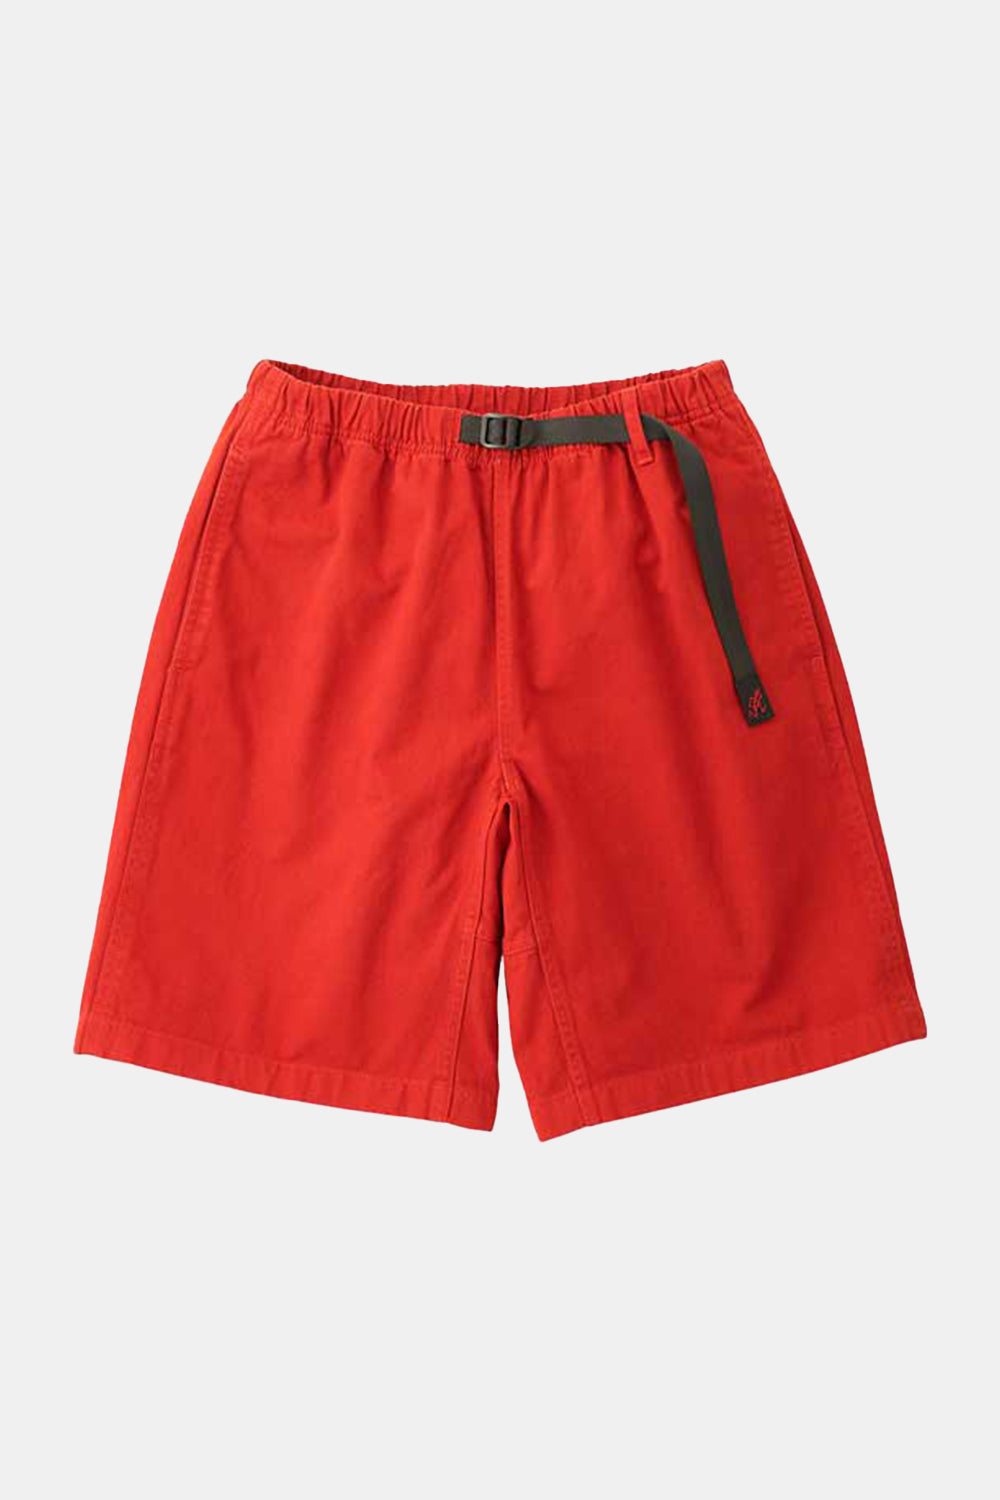 Gramicci G-Shorts Double-ringspun Organic Cotton Twill (Dusty Red) | Number Six